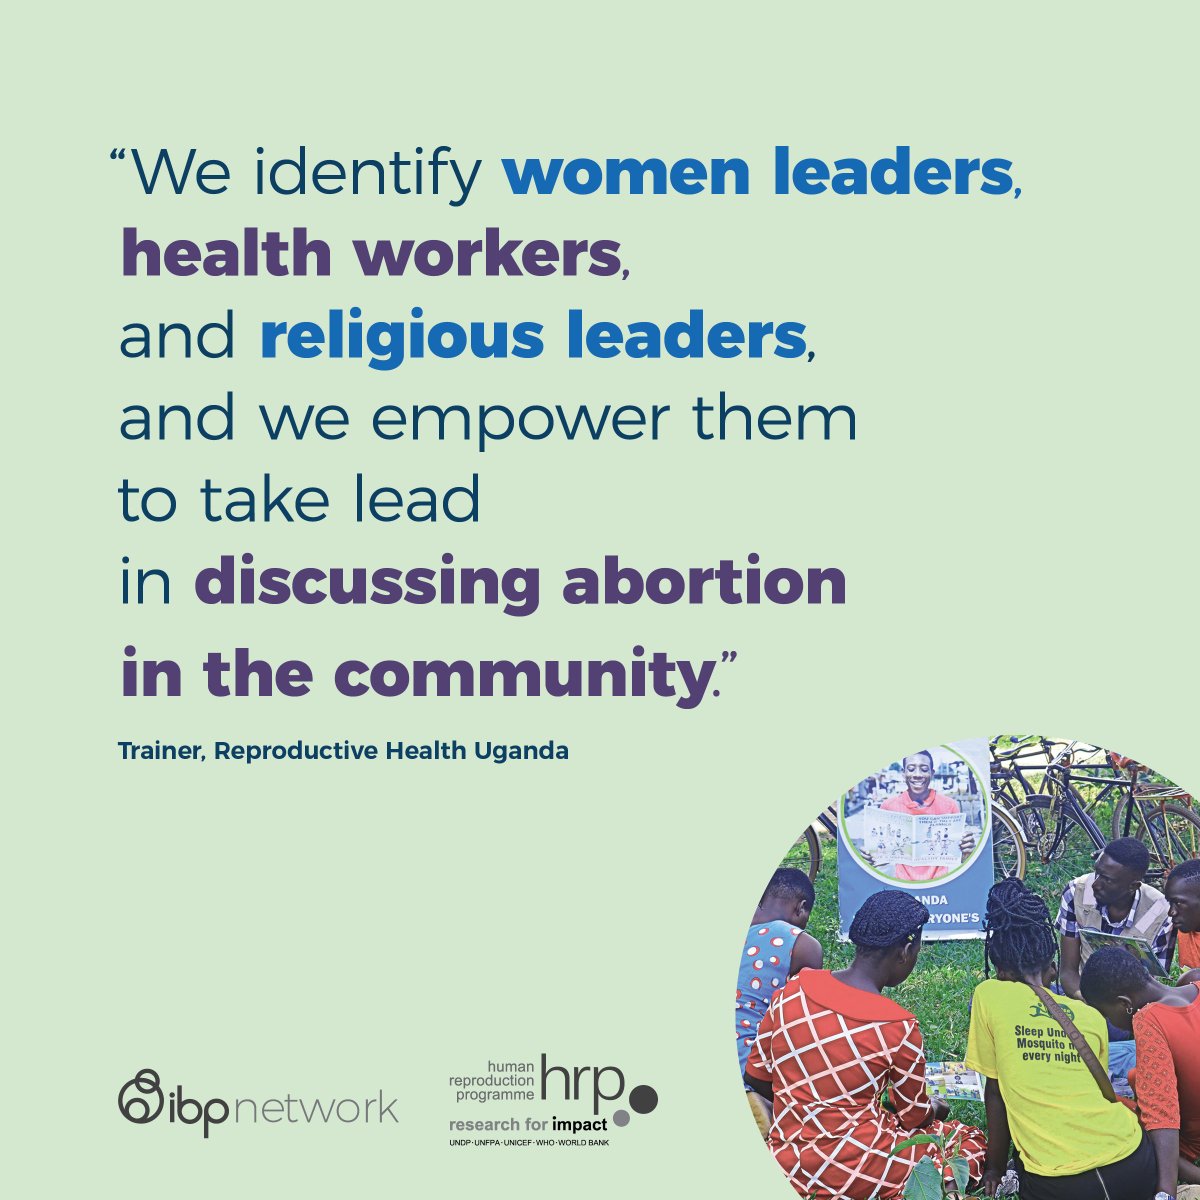 NGOs & CSOs are key players in the #unstoppableMovement to promote access to quality #abortion. 5 inspiring stories by @WHO & @IBP_network show how grassroots translate global guidance into concrete actions that protect women’s health on the ground #sept28 bit.ly/3ZxekU2